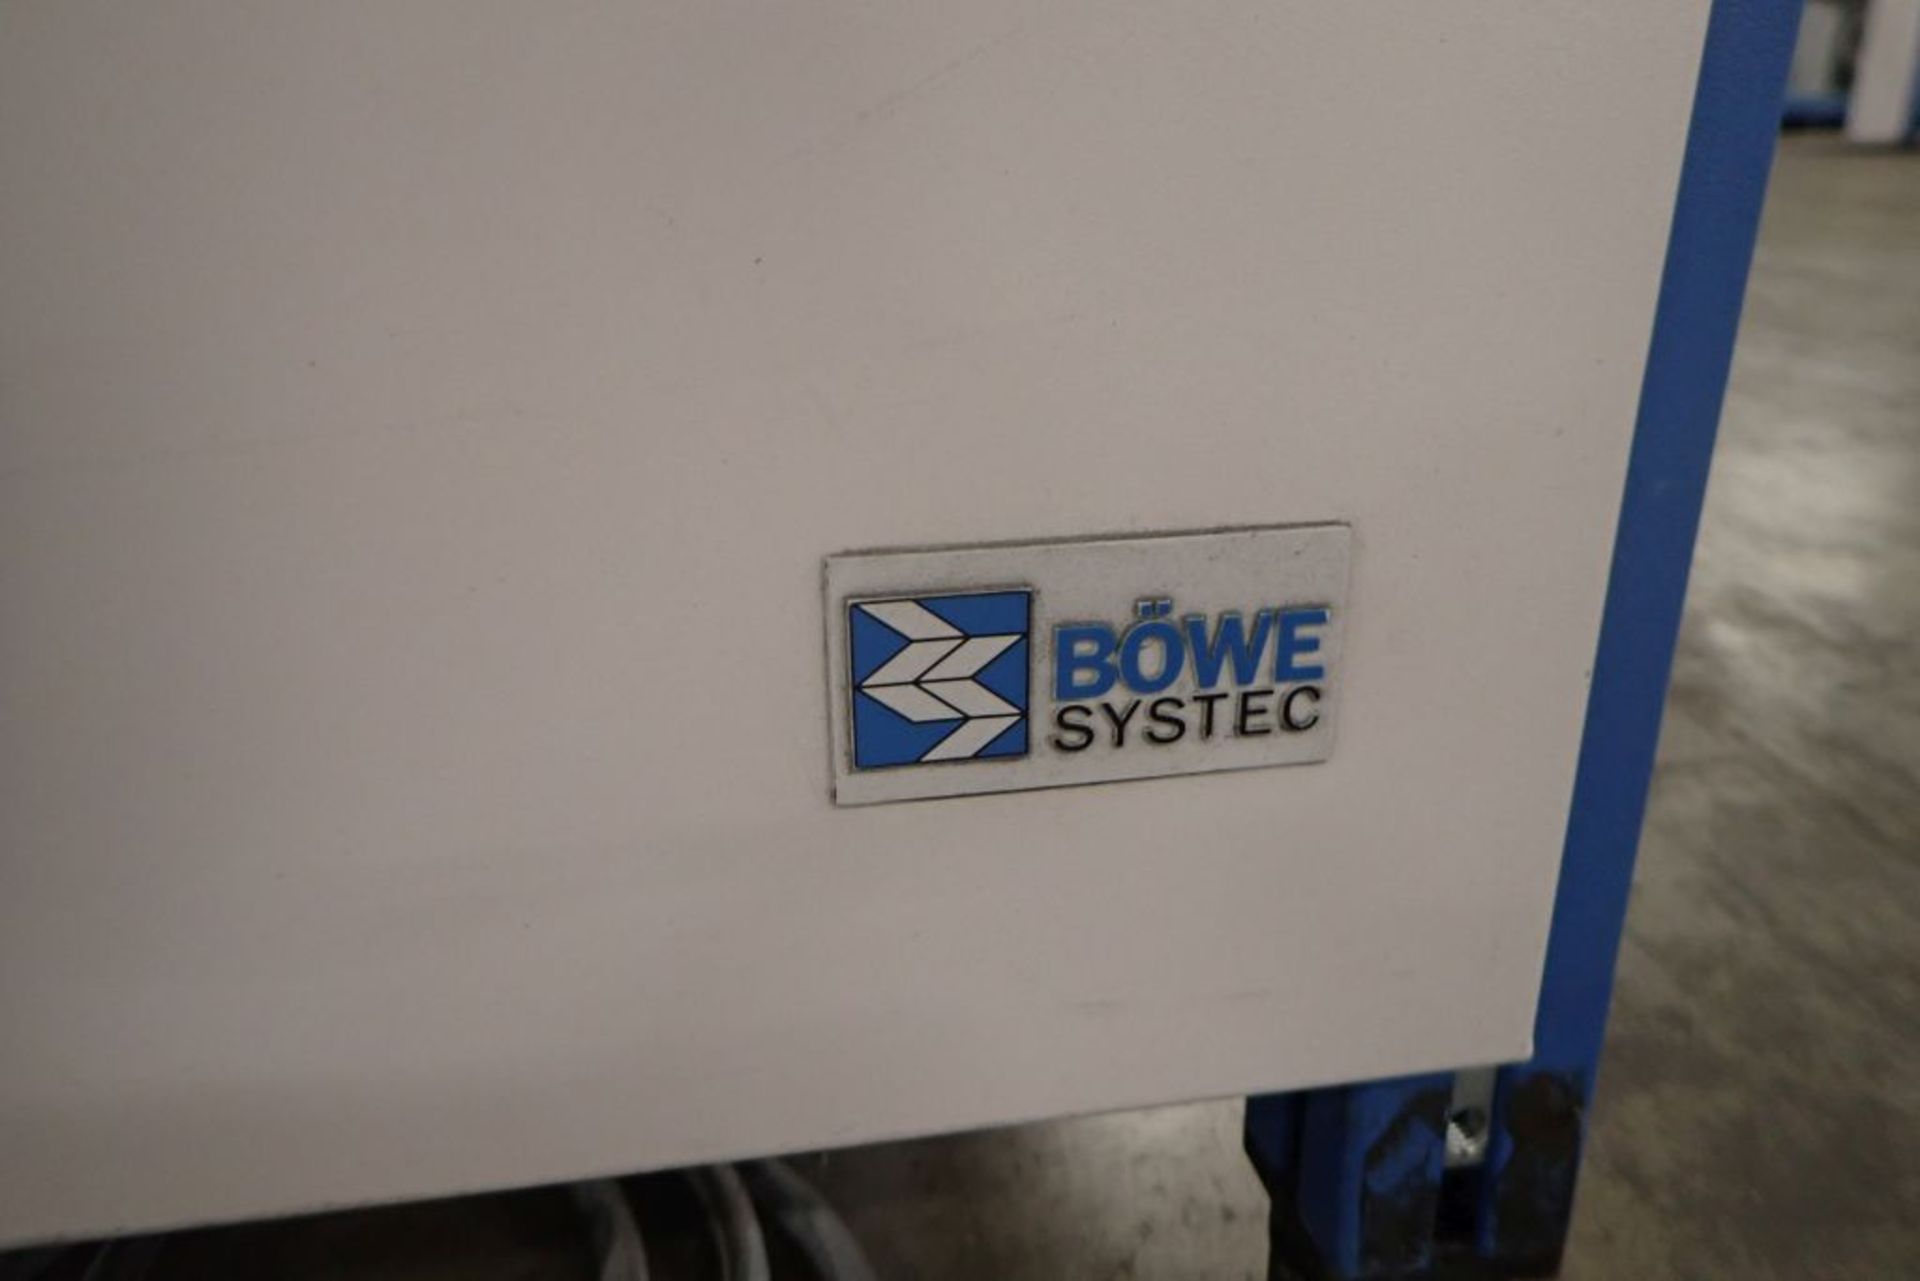 Bowe Systec Turbo Premium Automatic Mailing System - Image 24 of 297